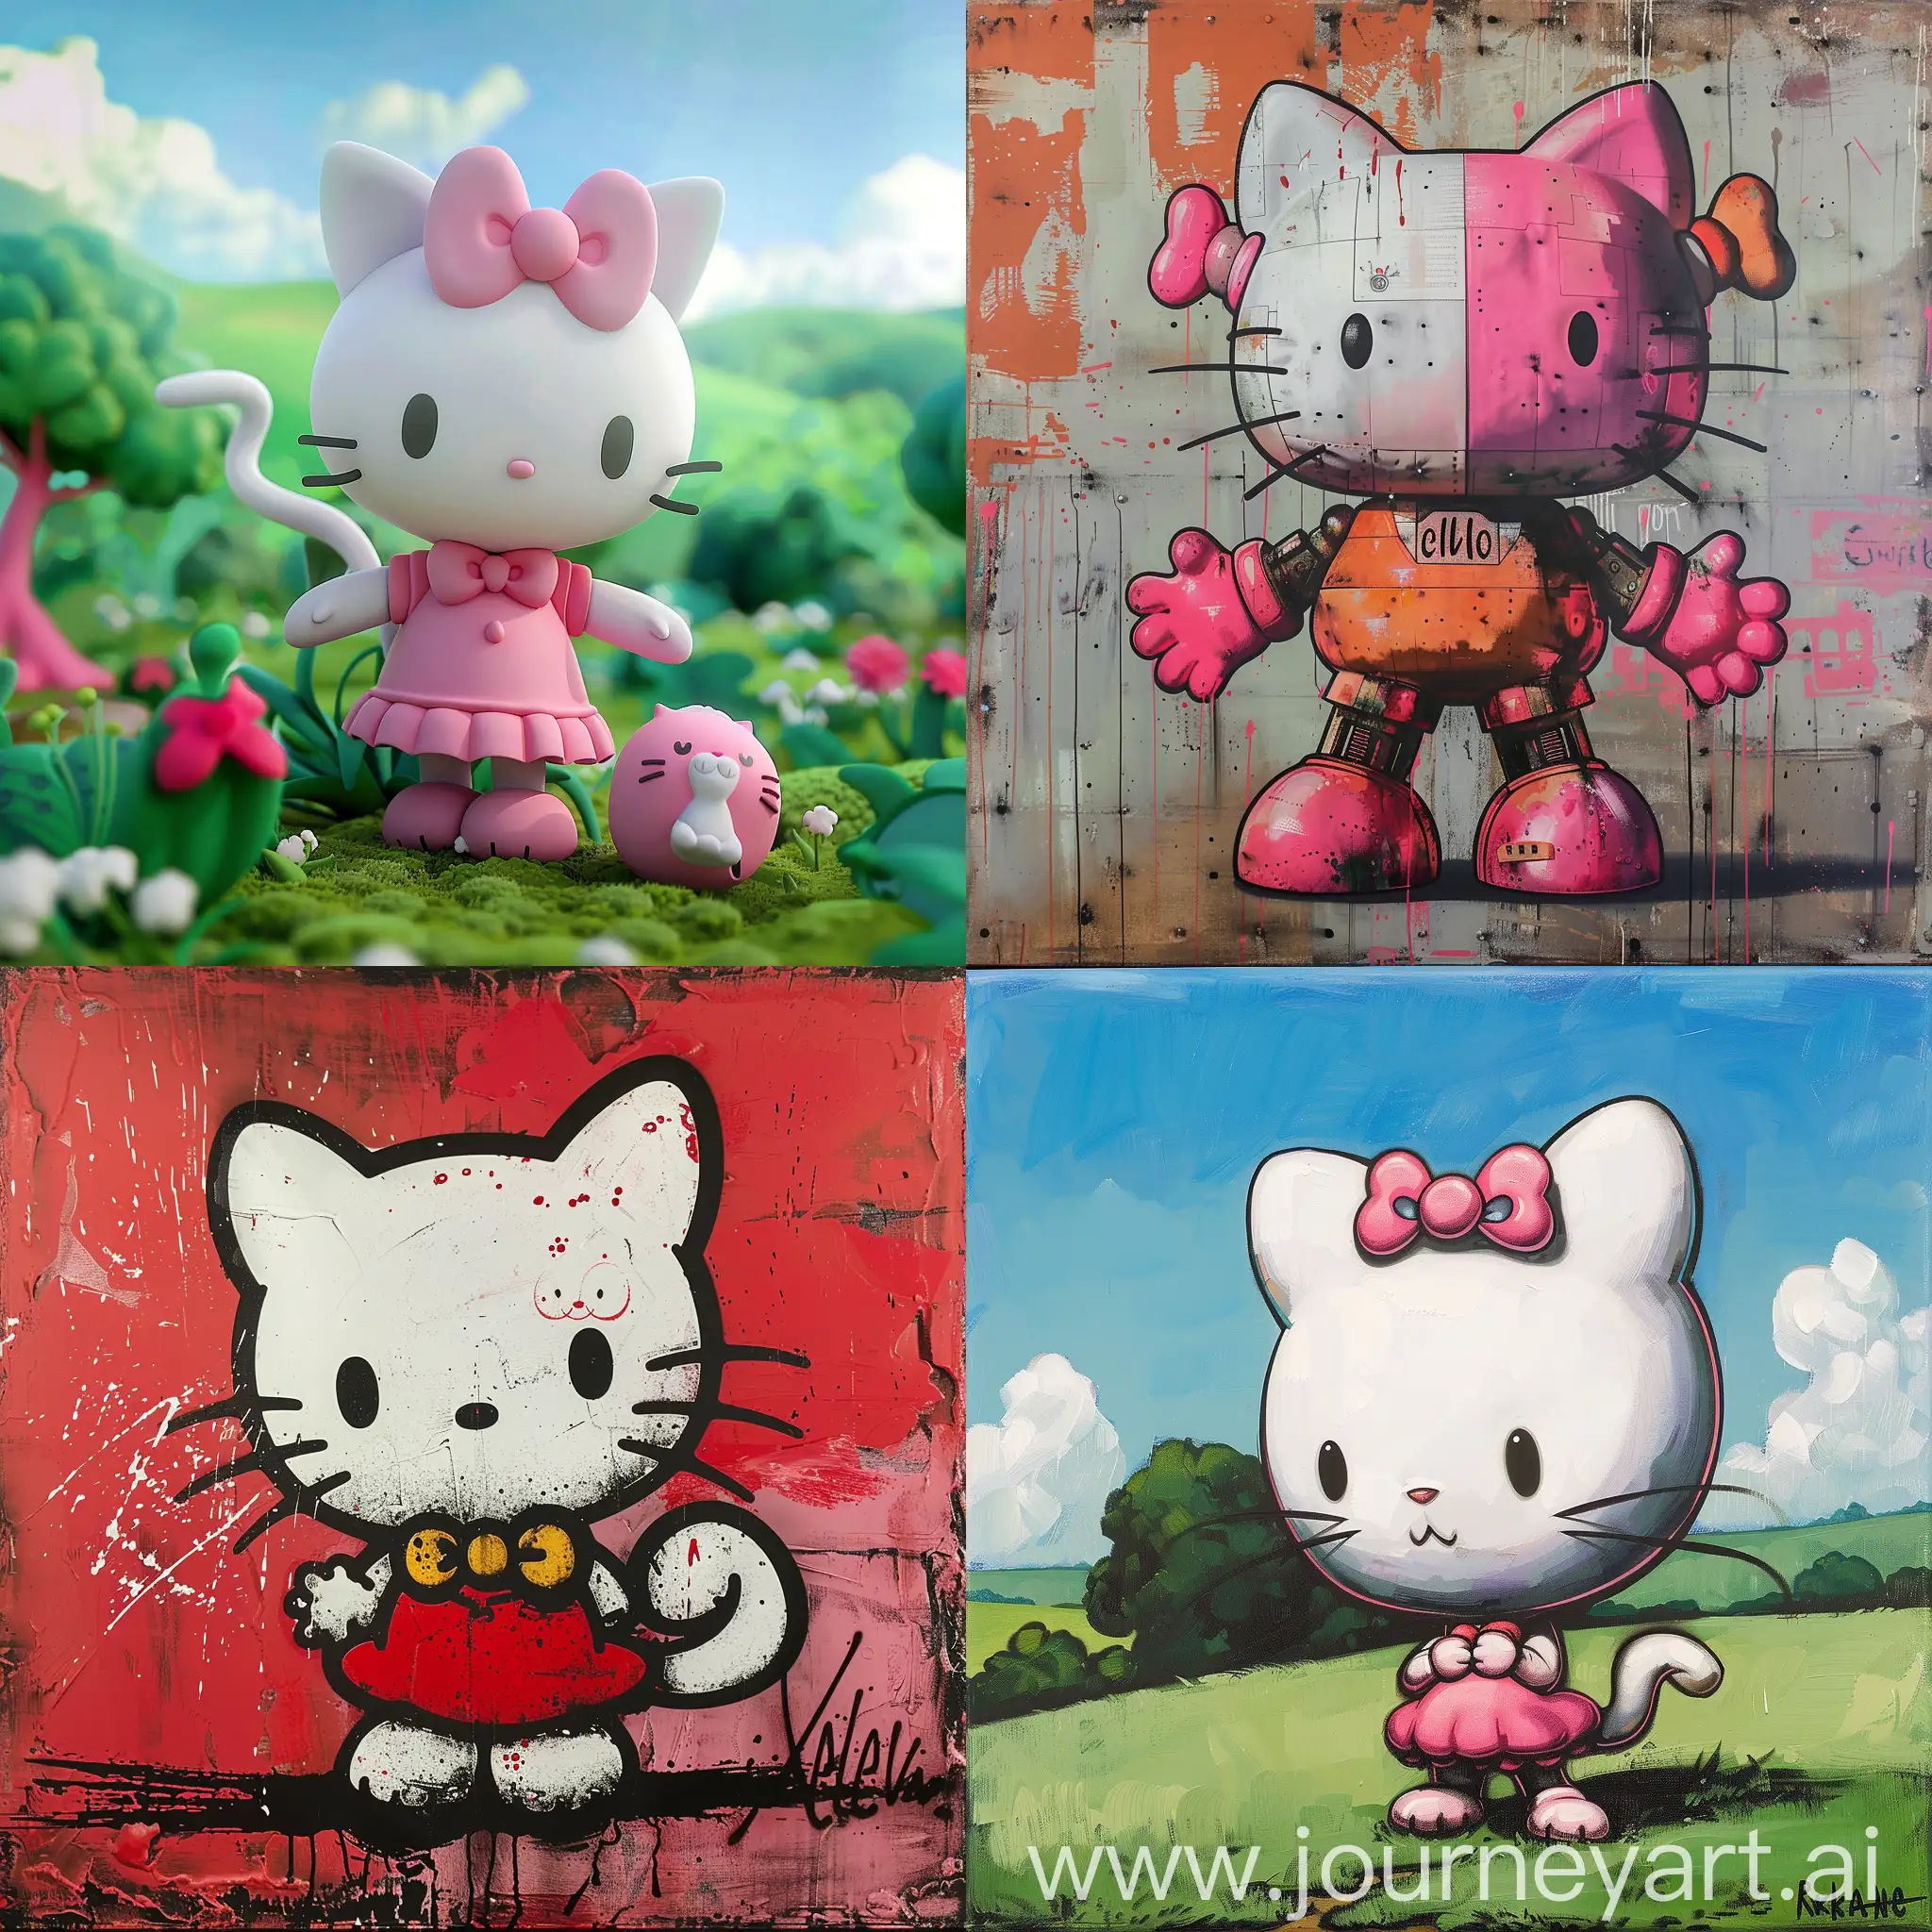 Fashionable-Hello-Kitty-Inspired-Art-by-Rick-Owens